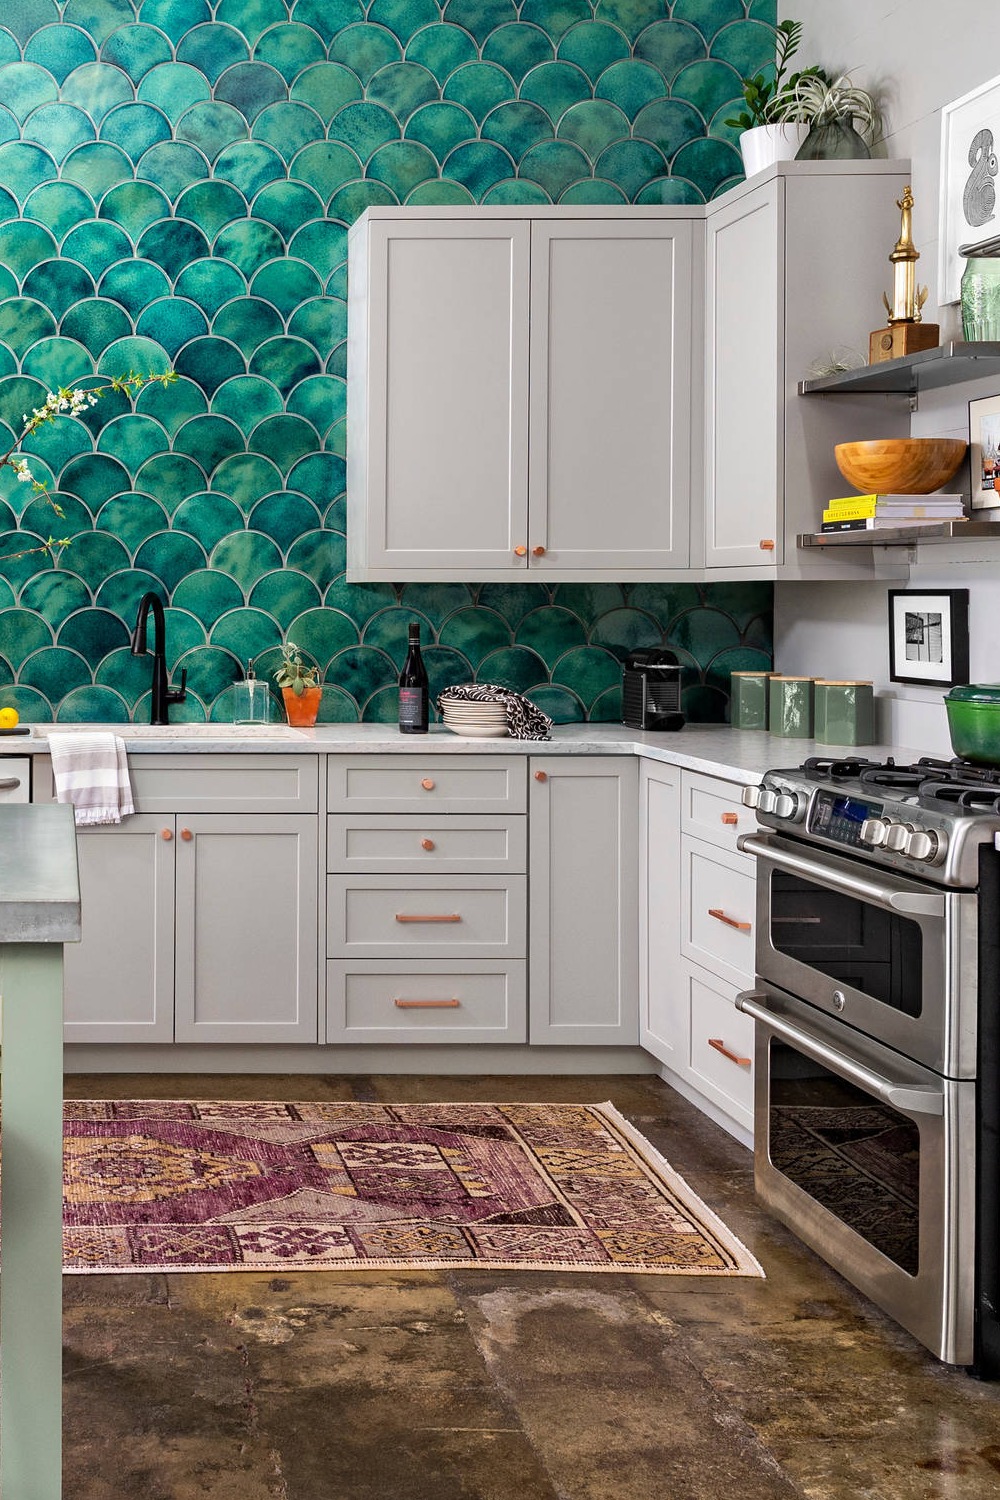 Eclectic Kitchen Traditional Kitchen Rustic Feel Beachy Vibe Backsplash Options Green Porcelain Tile Brown Floor Shaker Stainless Steel Appliances